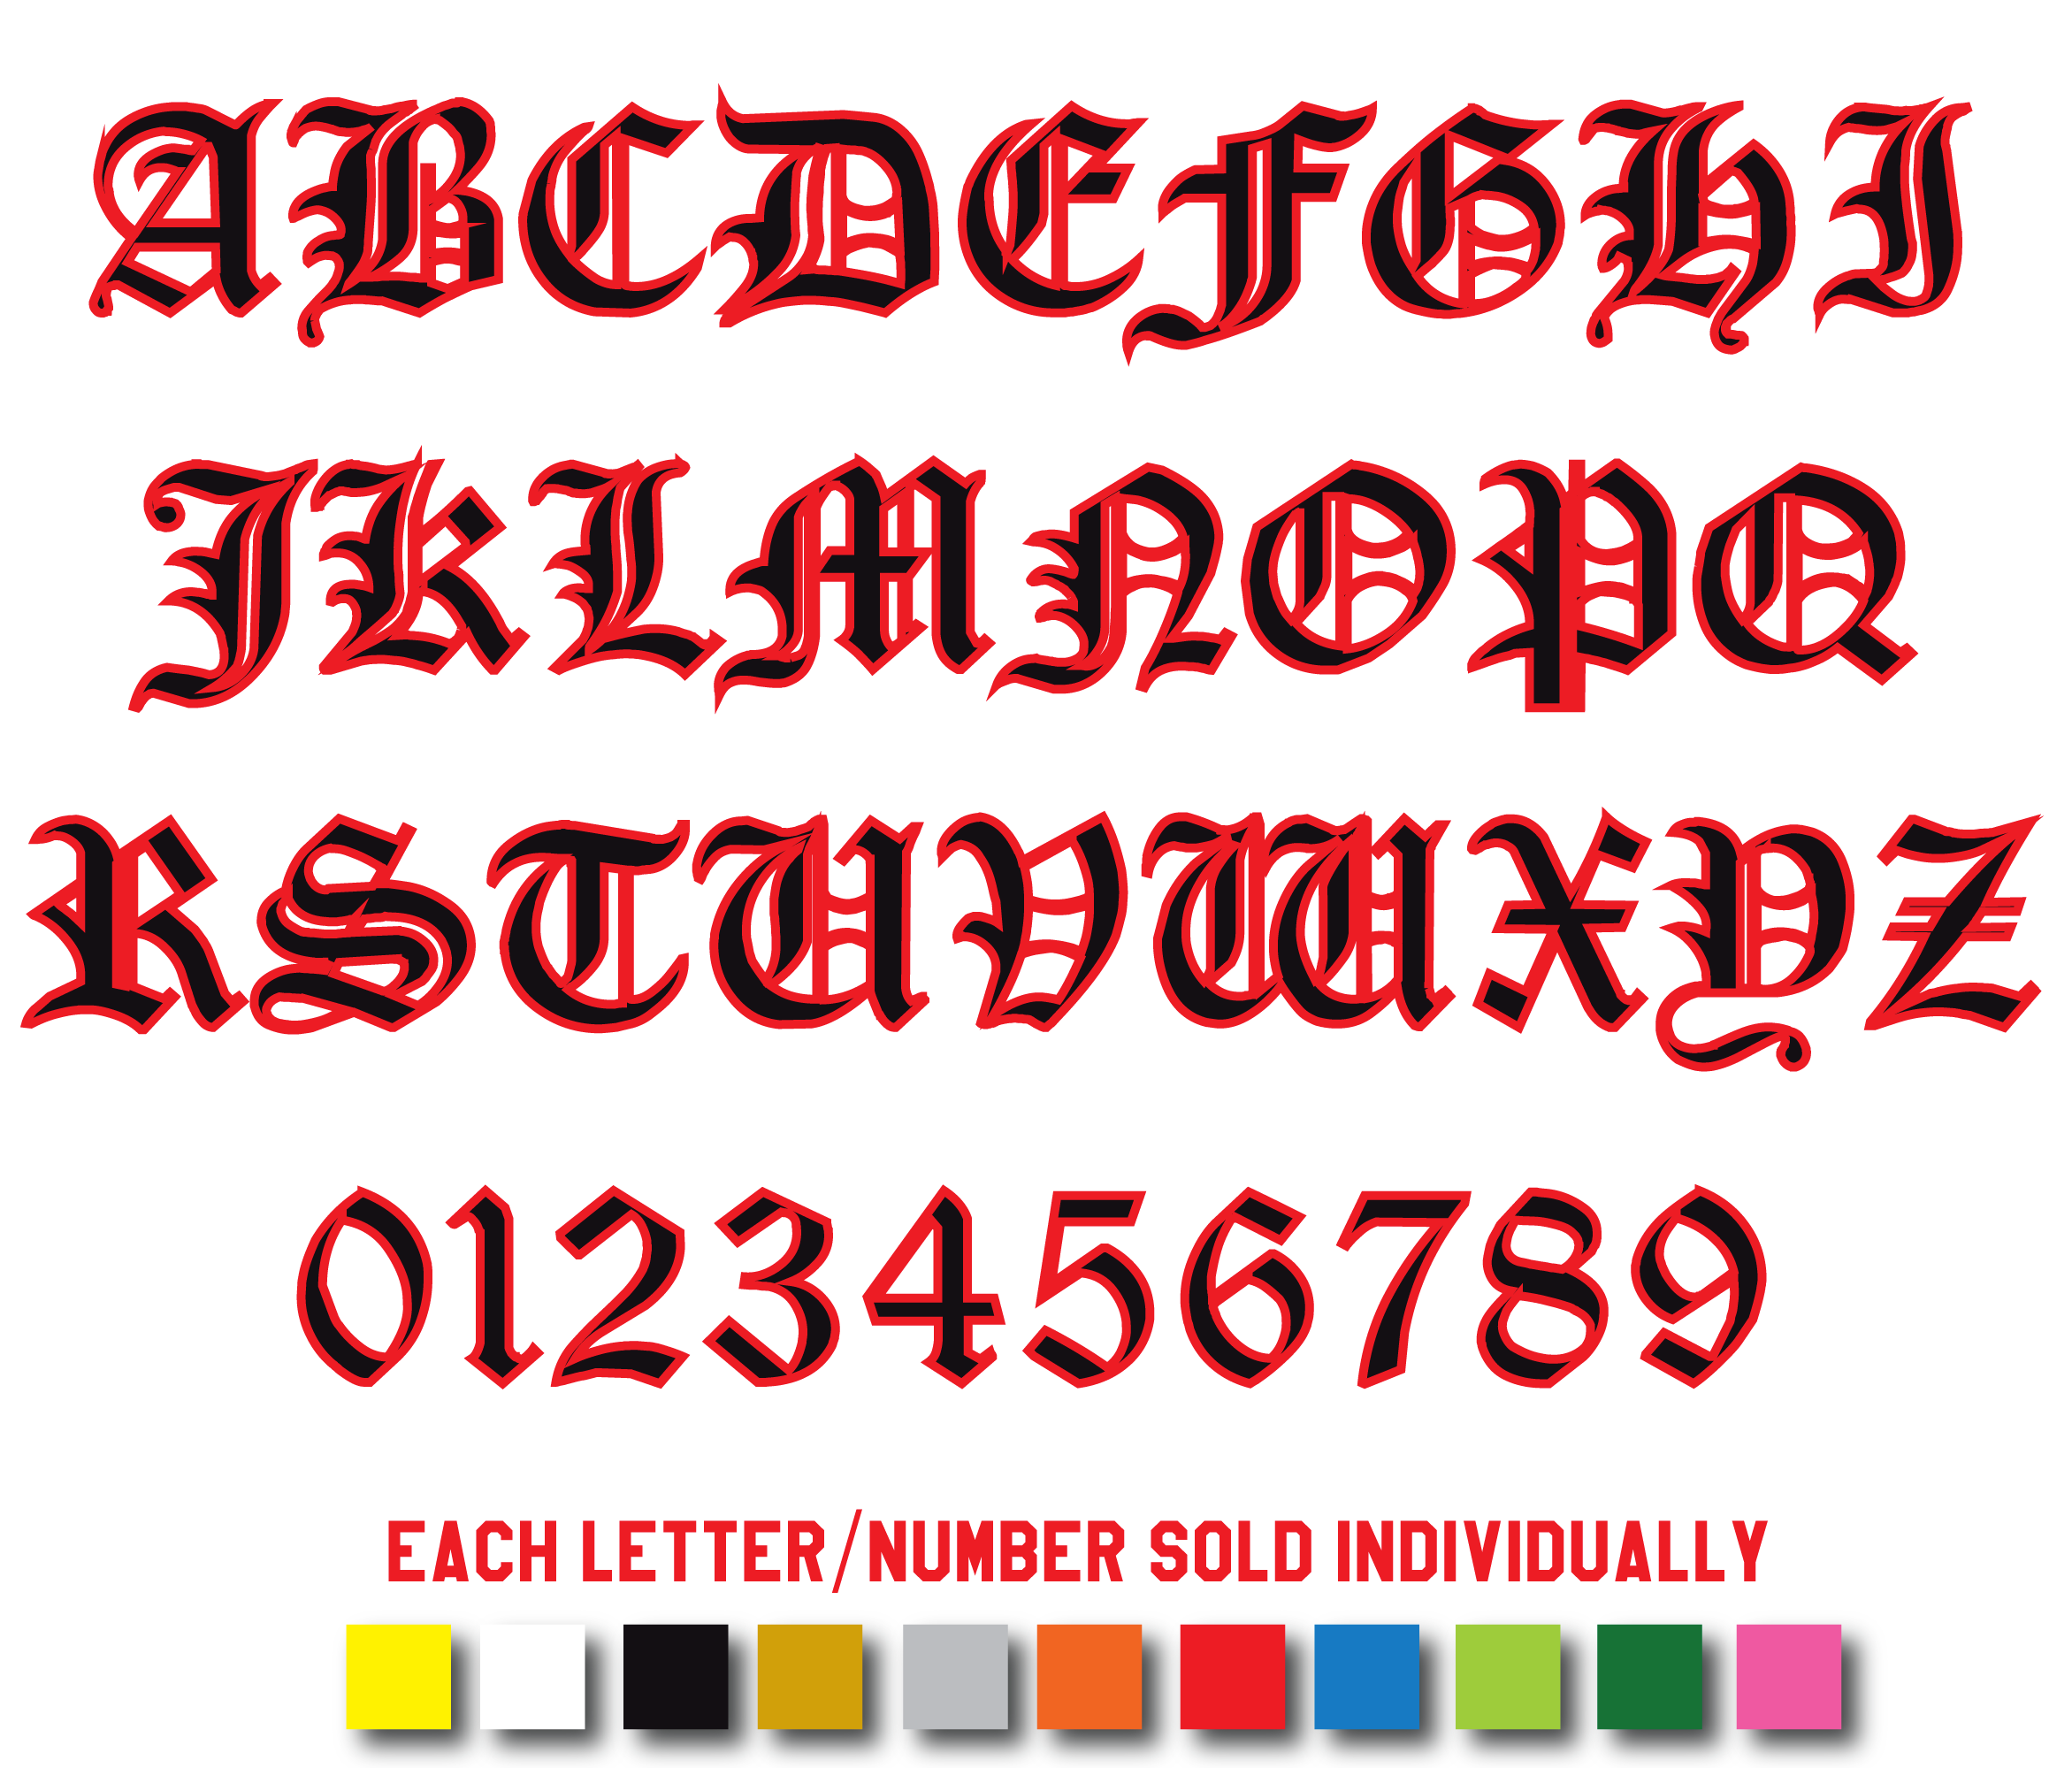 old english font numbers 1